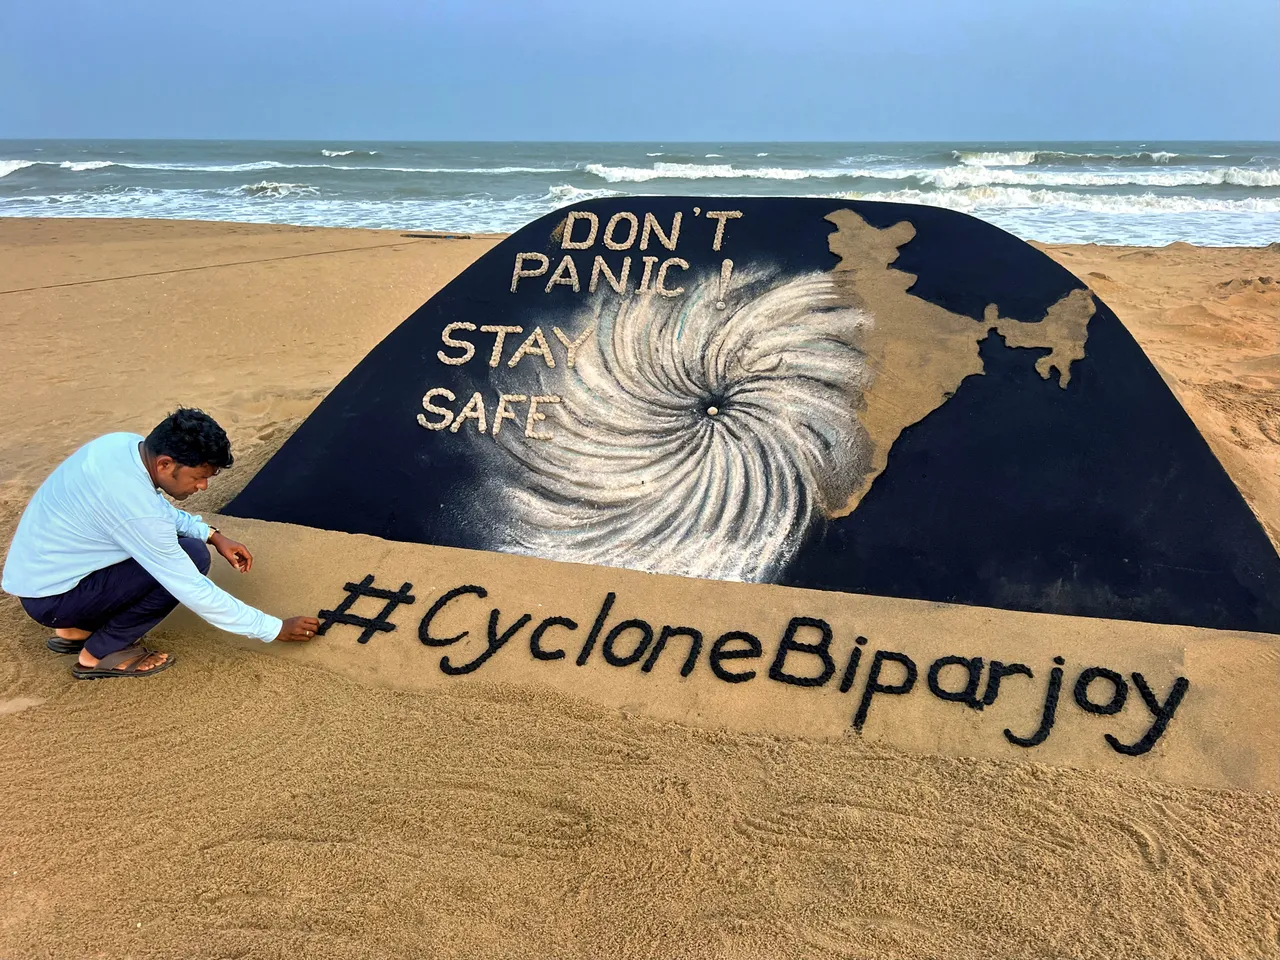 Sand artist Sudarsan Pattnaik creates a sand sculpture on Cyclone Biparjoy with a message ‘Don’t panic, stay safe’